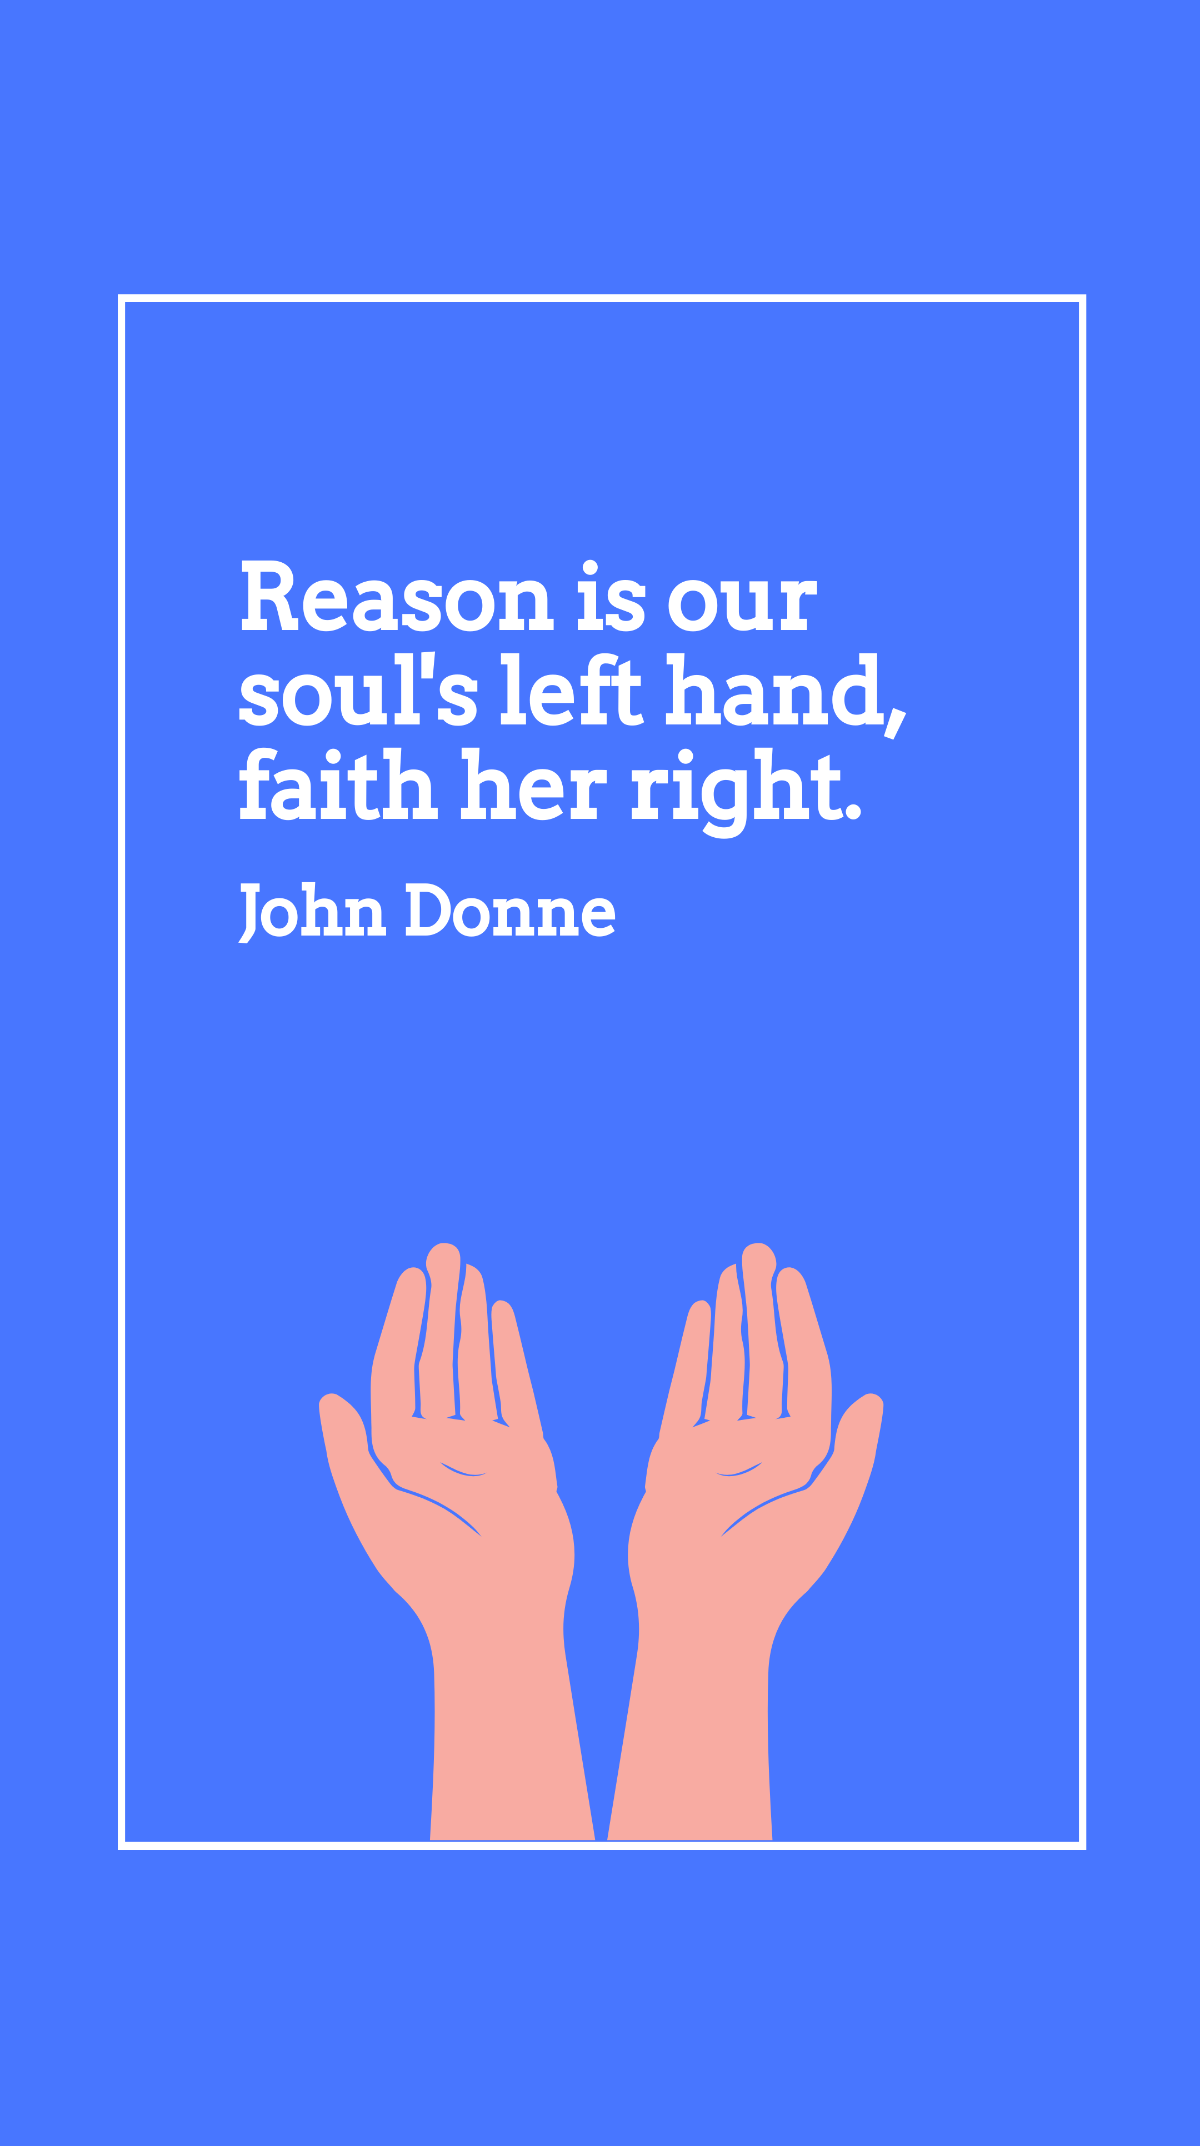 Free John Donne - Reason is our soul's left hand, faith her right. Template